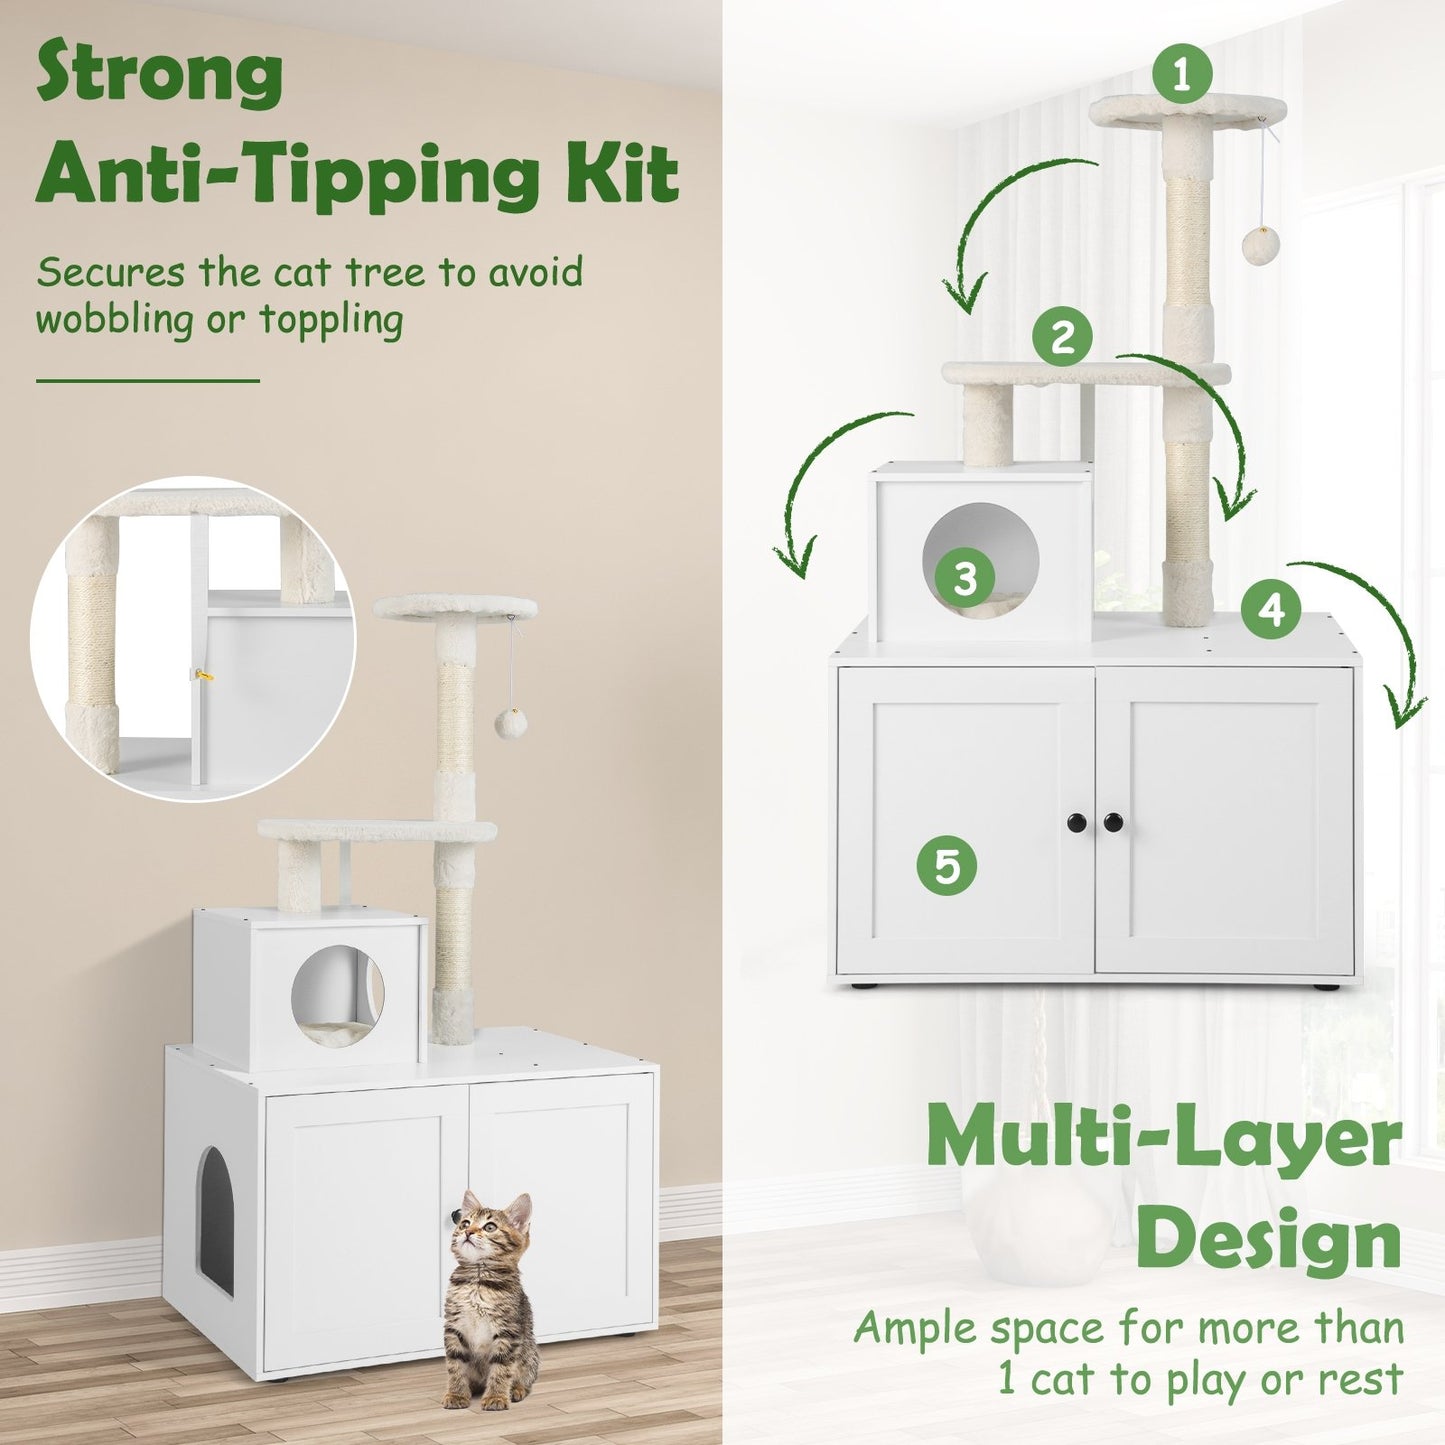 Cat Tree with Litter Box Enclosure with Cat Condo, White at Gallery Canada